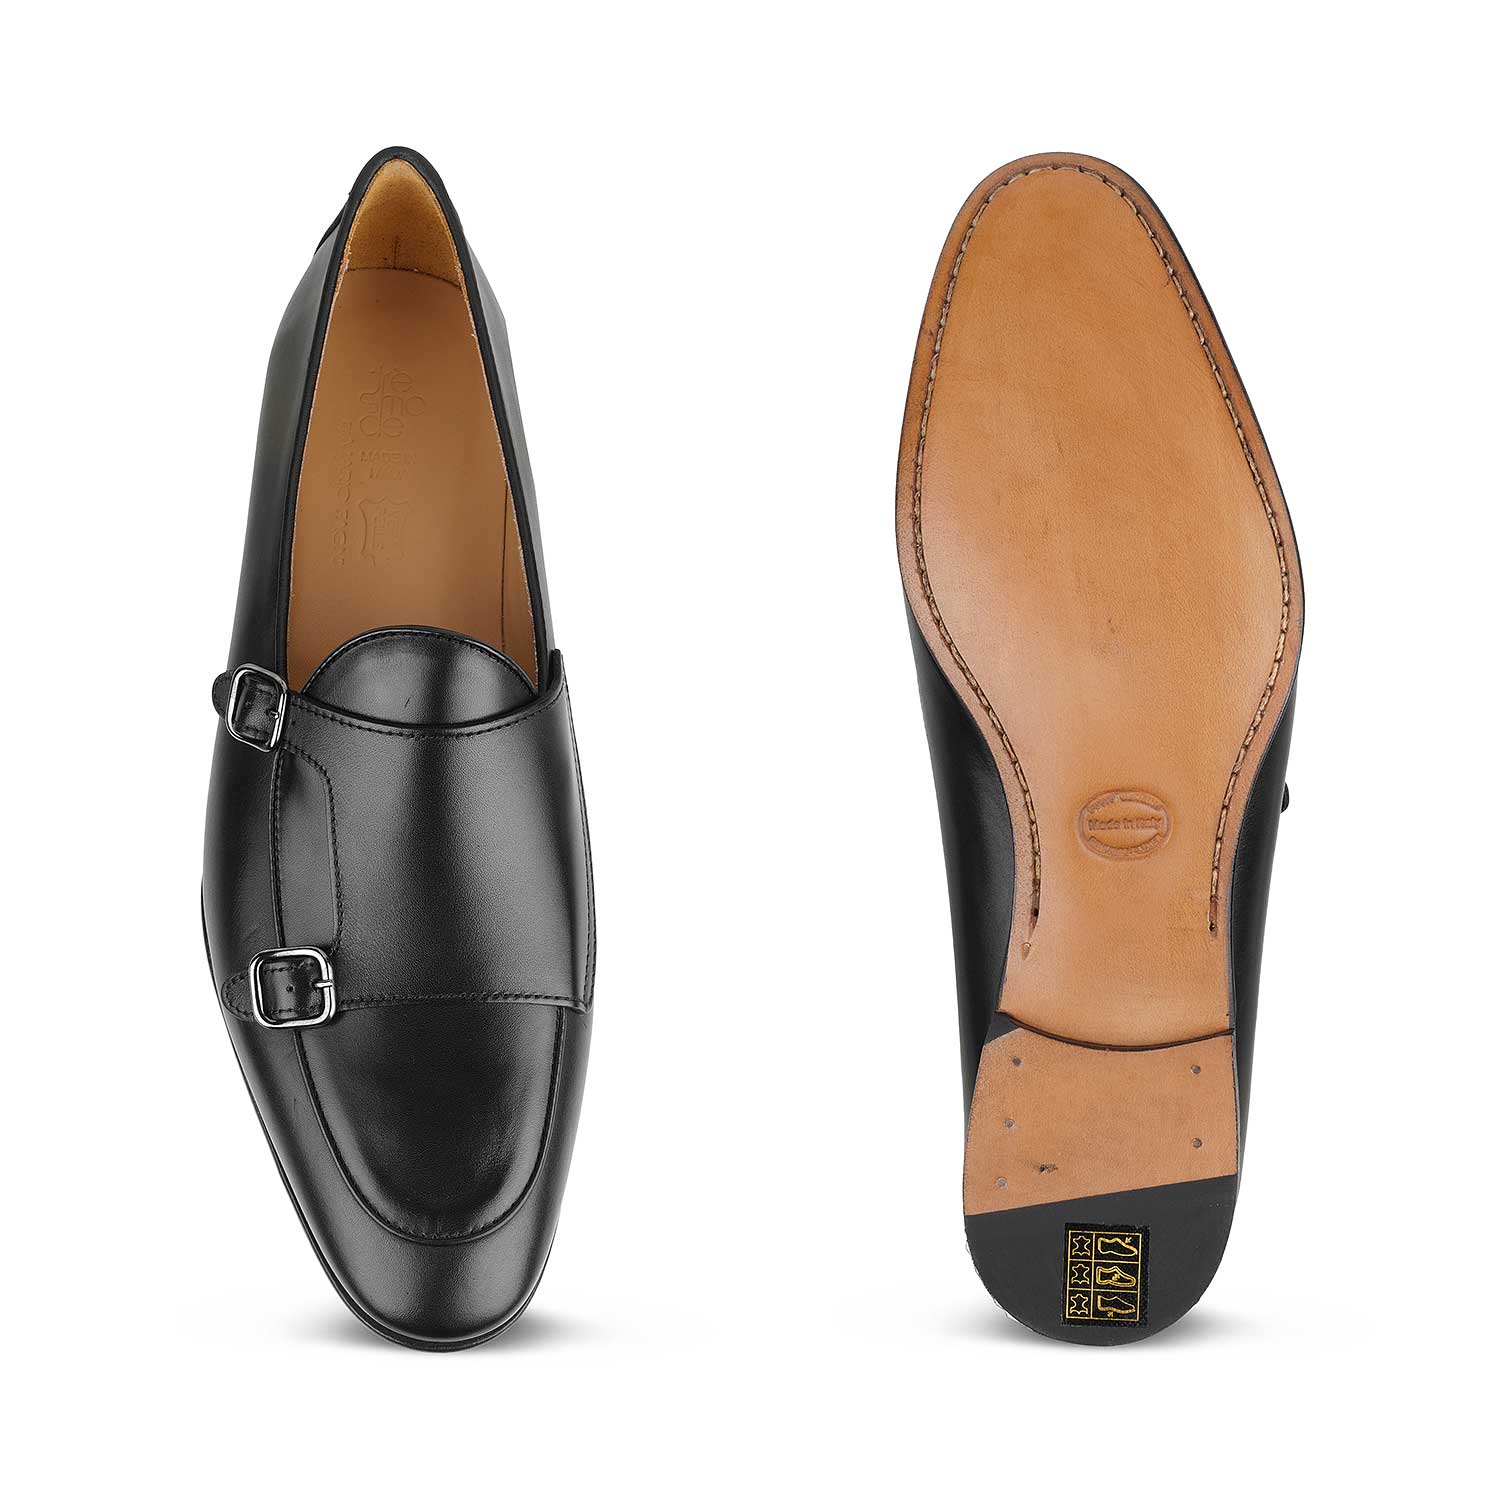 The Maccabeo Black Men's Handcrafted Double Monk Shoes Tresmode